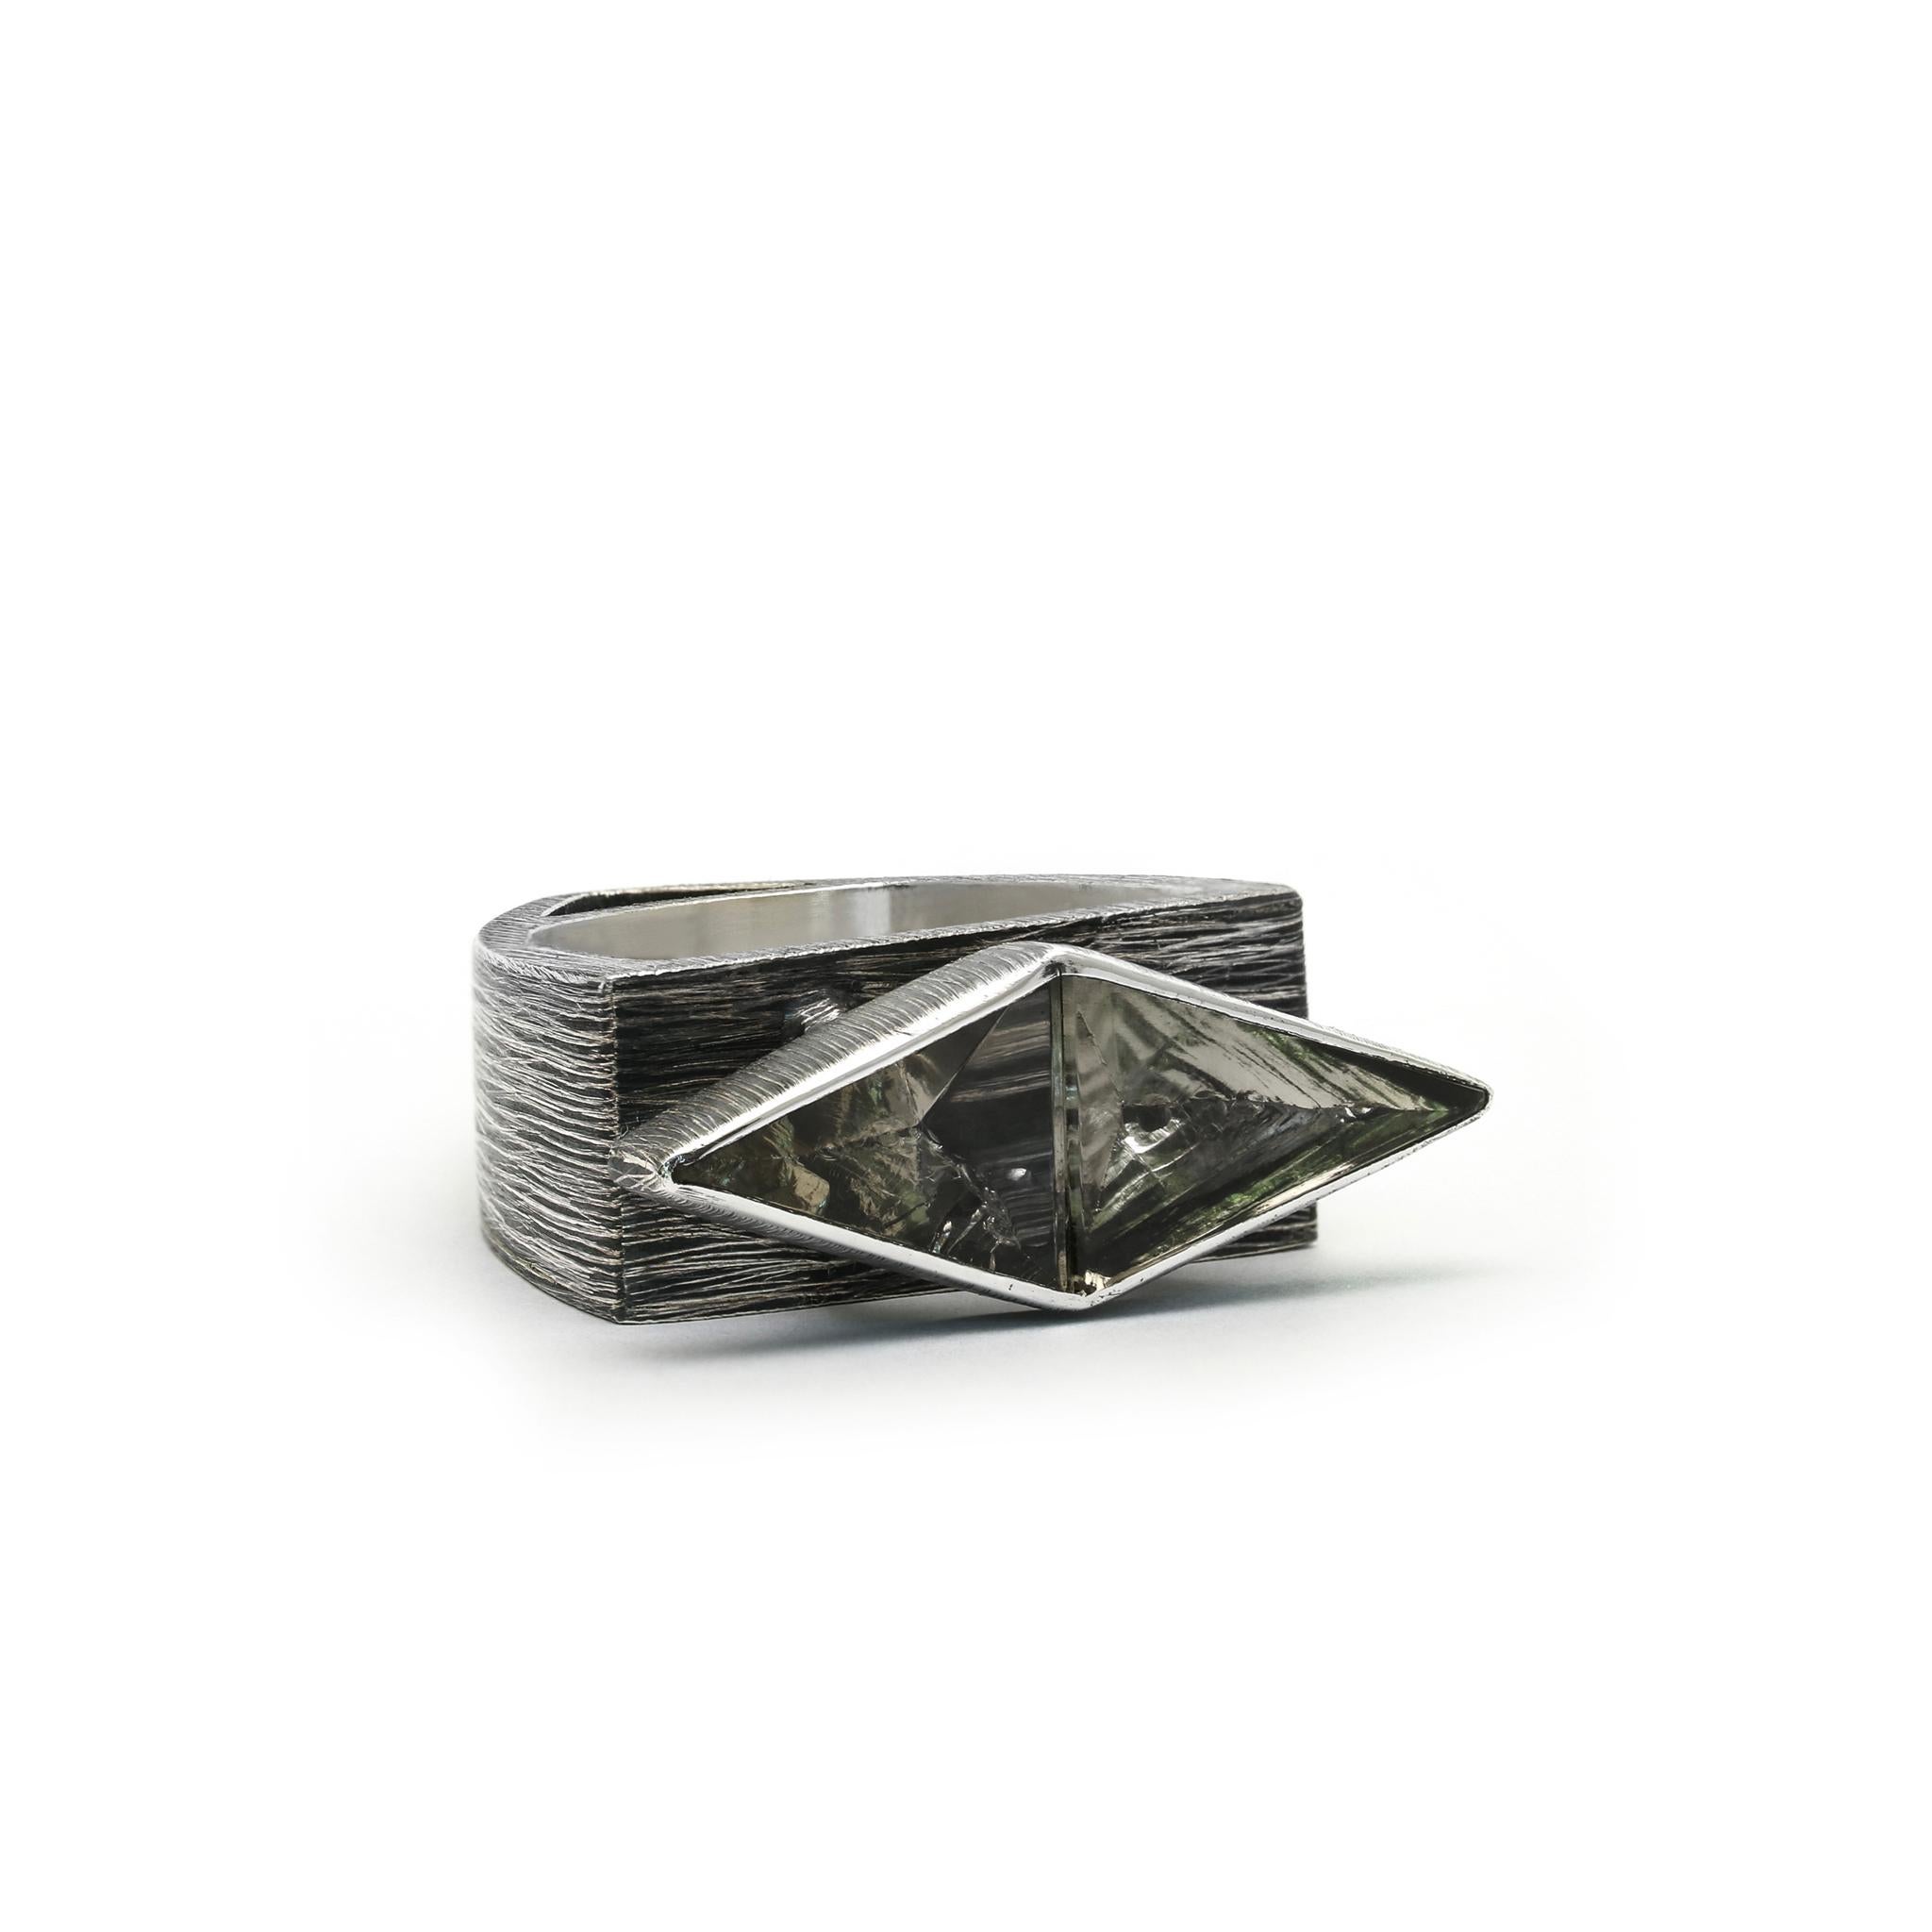 A symmetrical pair of rough-hewn crystal triangles float together, resembling an inverted arch over the band of the ring. 
925 Sterling Silver Etched and Oxidized
Set with 1 x 2,2cm rough-hewn crystals 
Due to the use of natural minerals in our